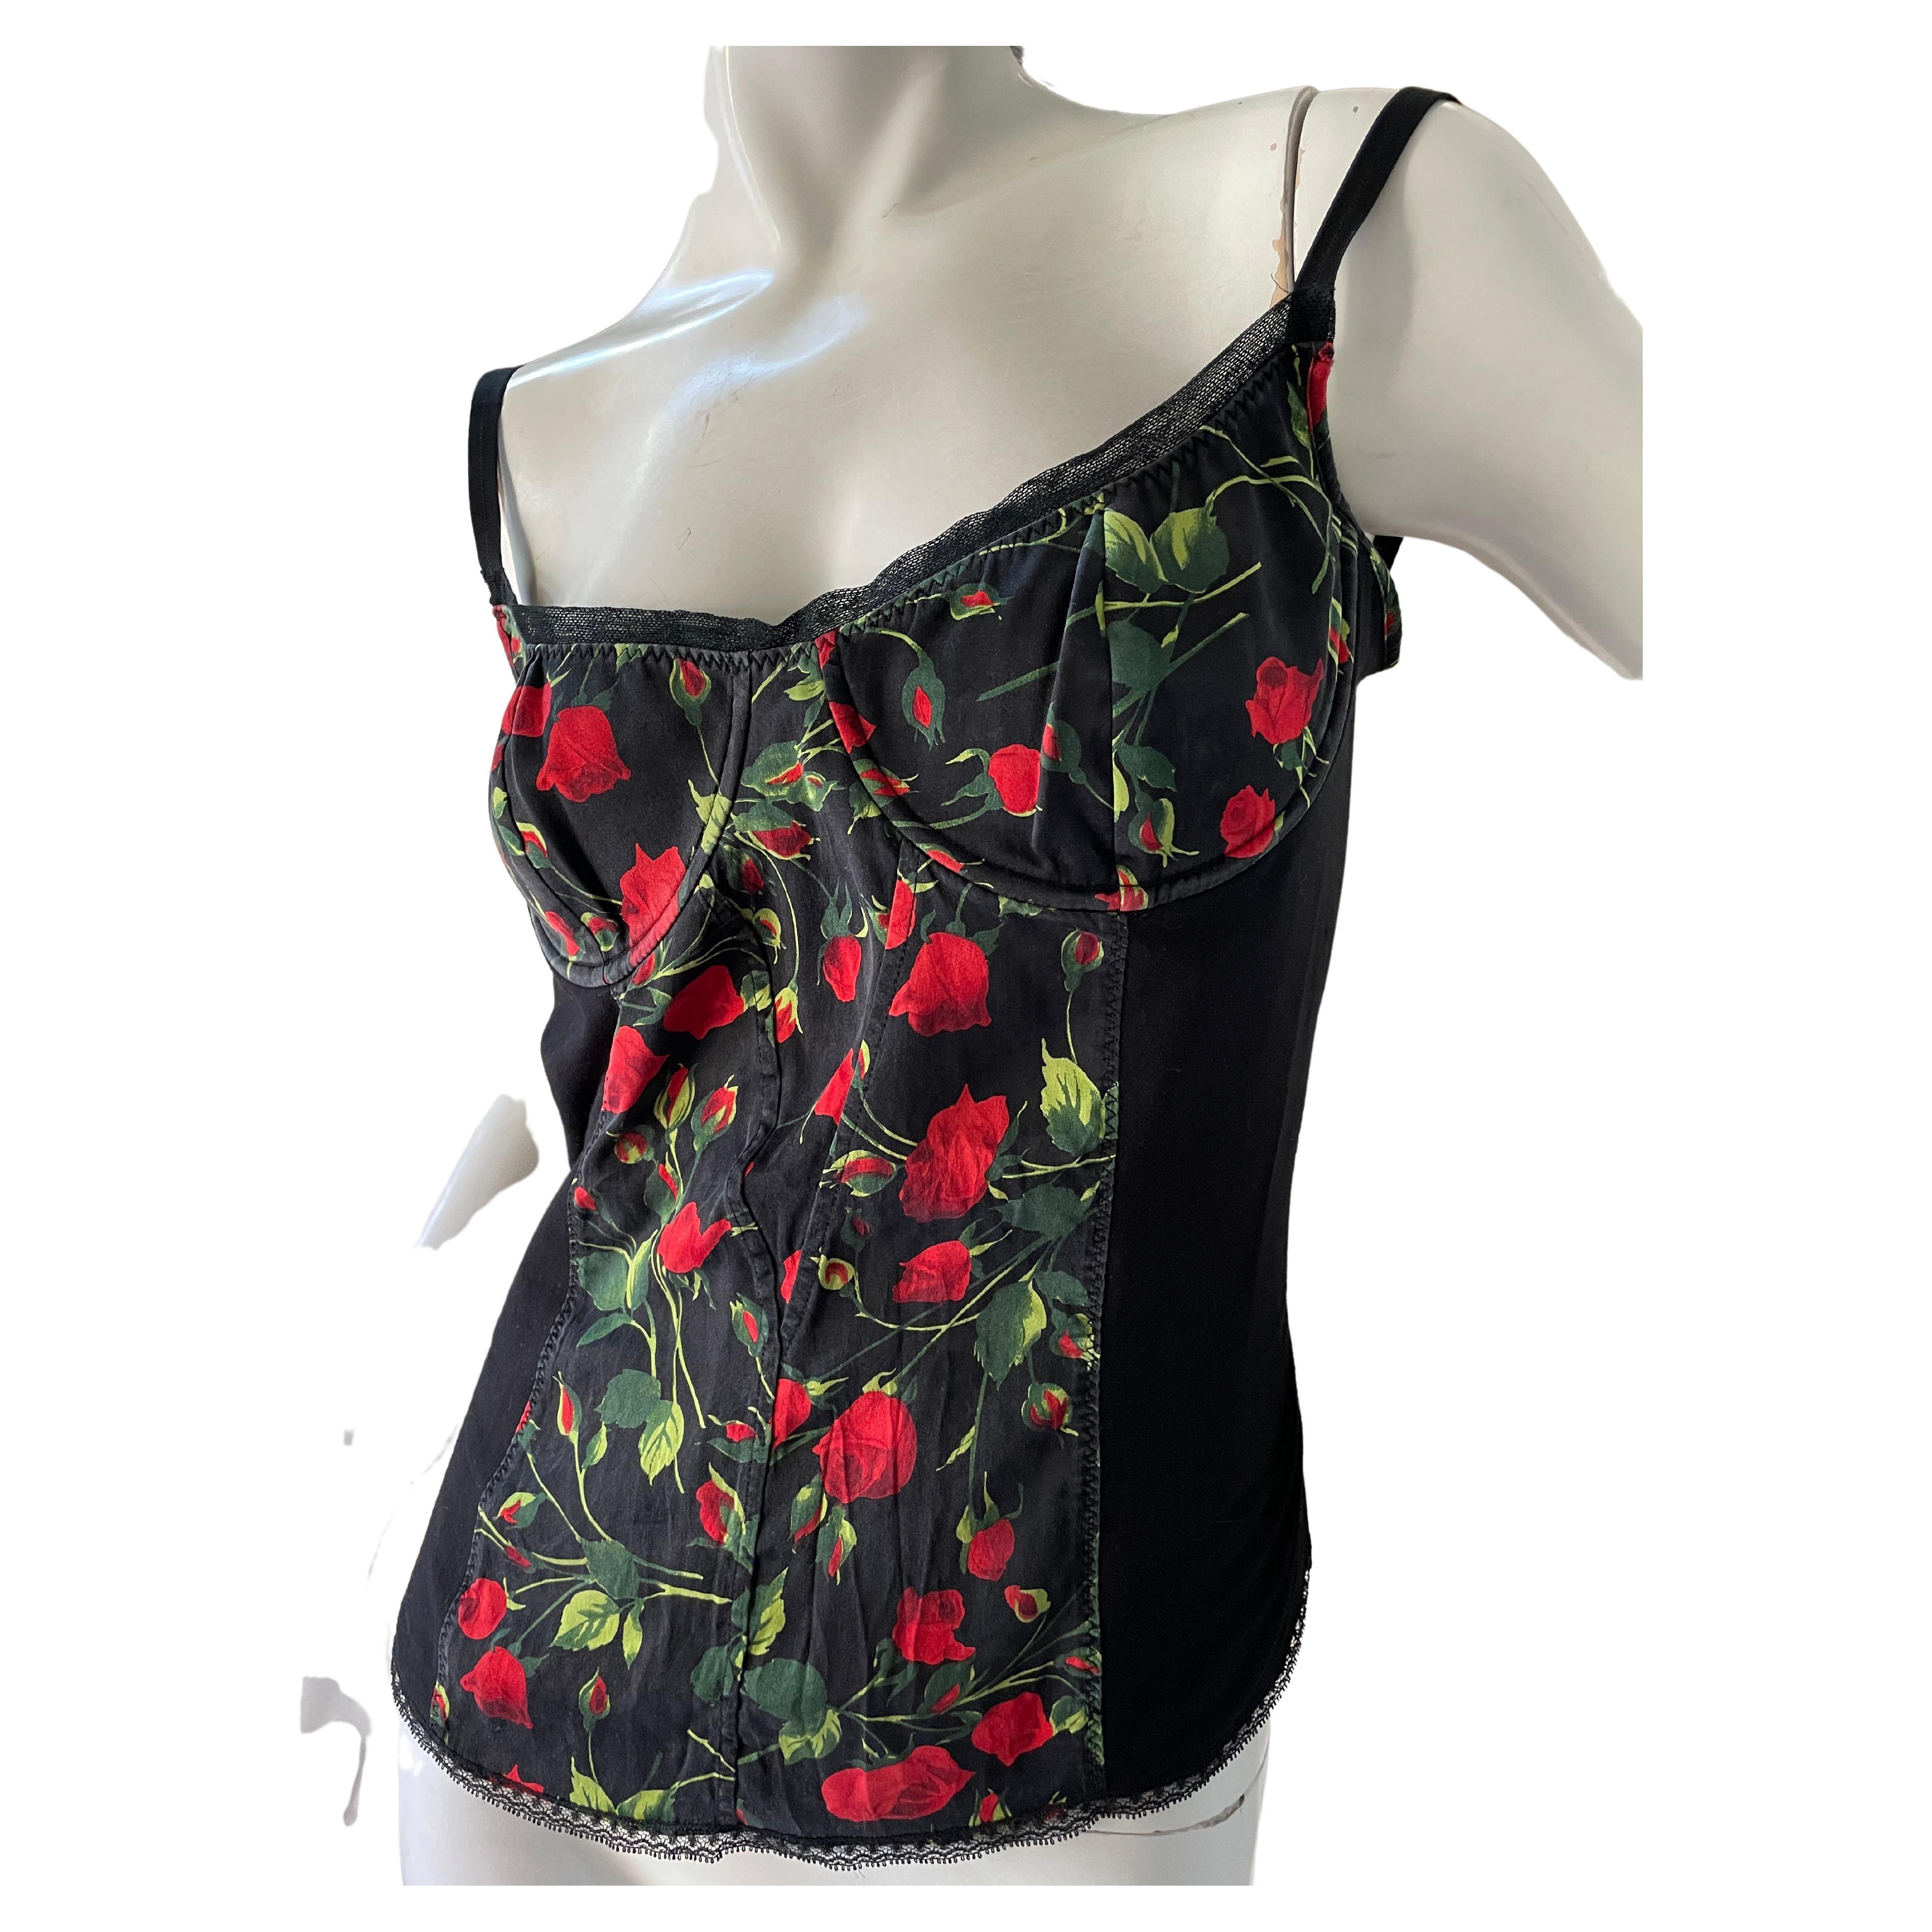 Dolce & Gabbana for D&G Vintage Cherry Print Corset Tank Top with Underwire Bra